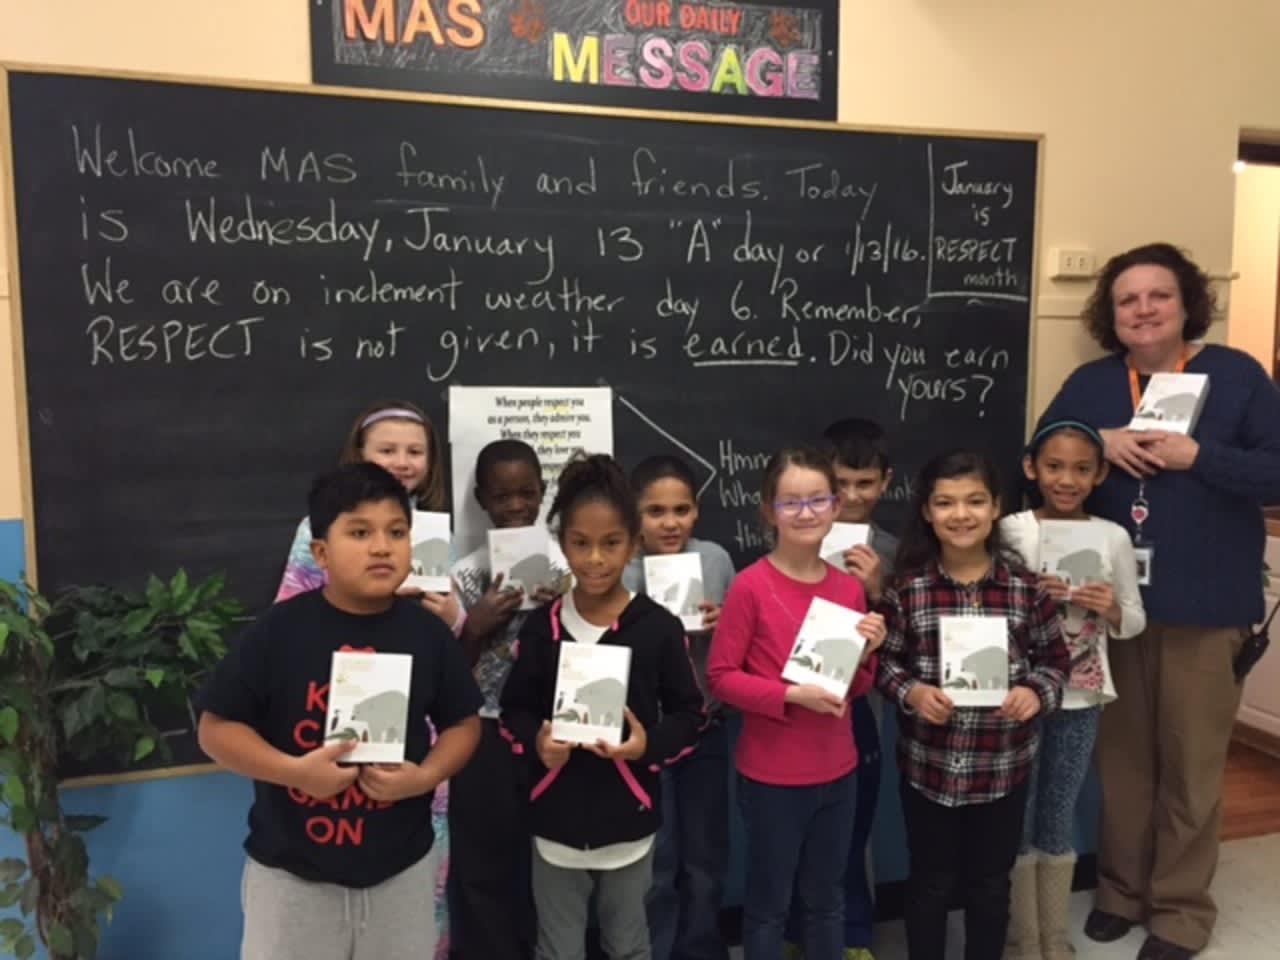 Some of Mamaroneck Avenue’s students with their principal, Eileen McGuire, and their dictionaries.